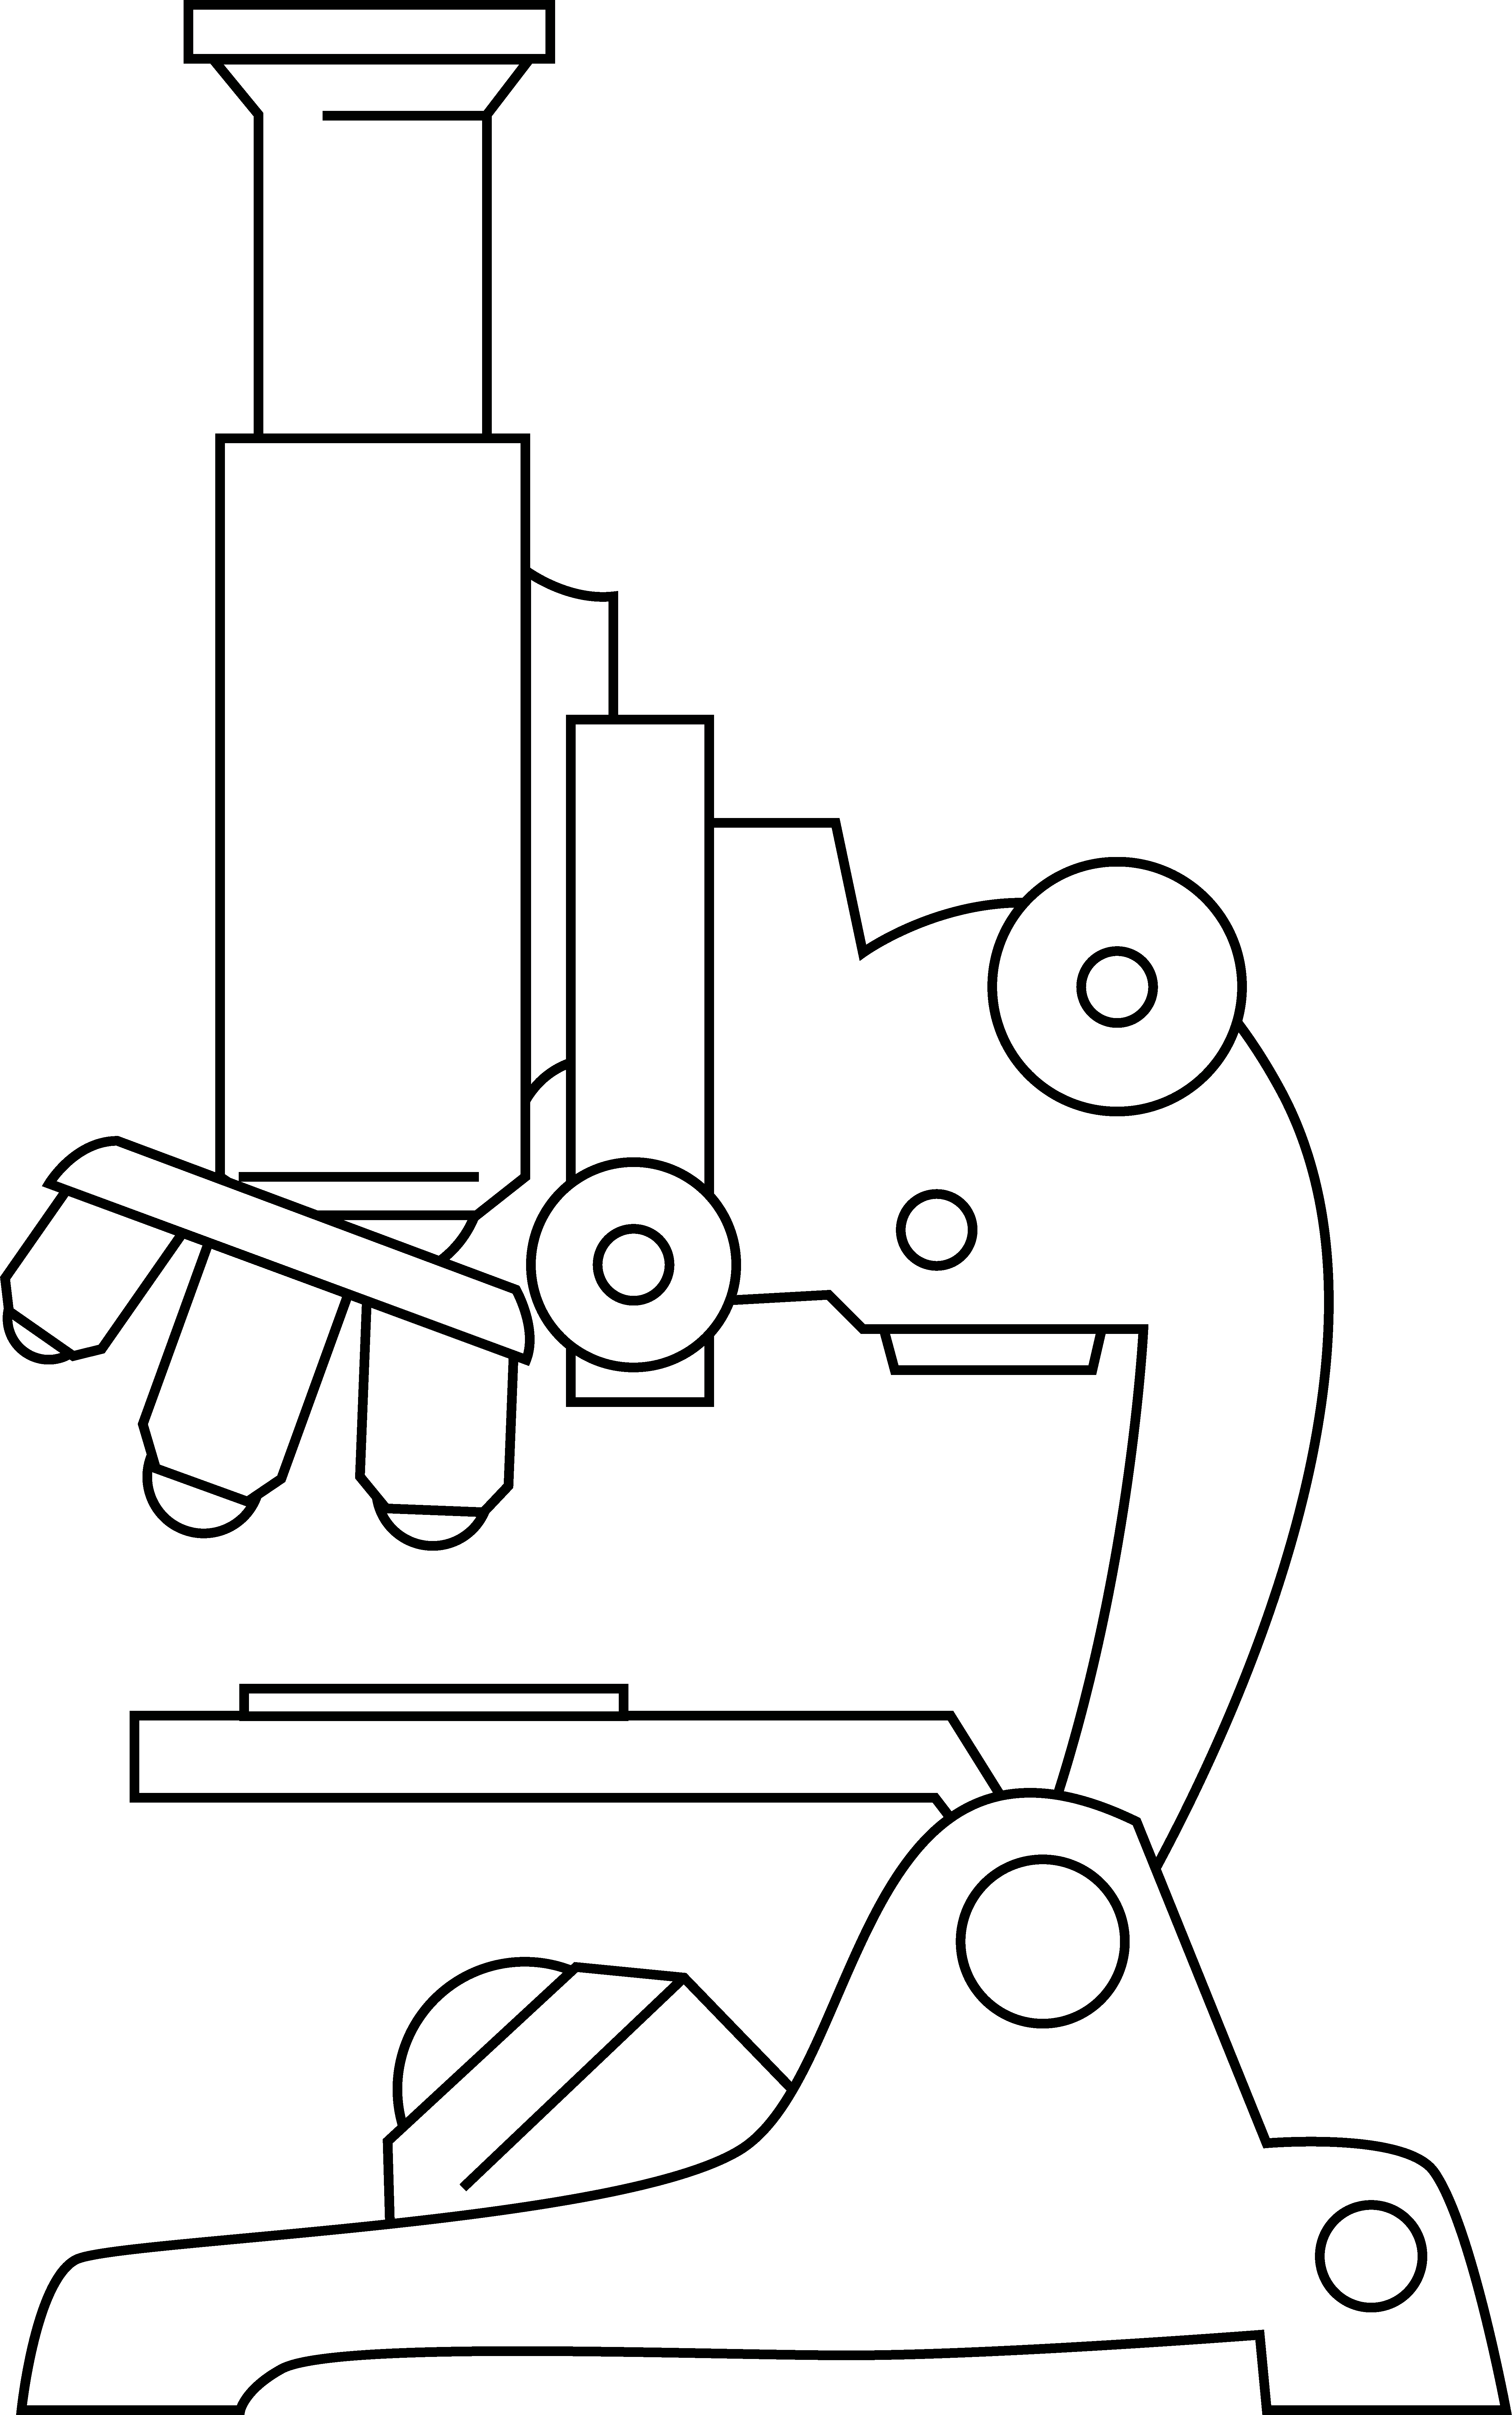 Microscope clipart cliparts and others art inspiration